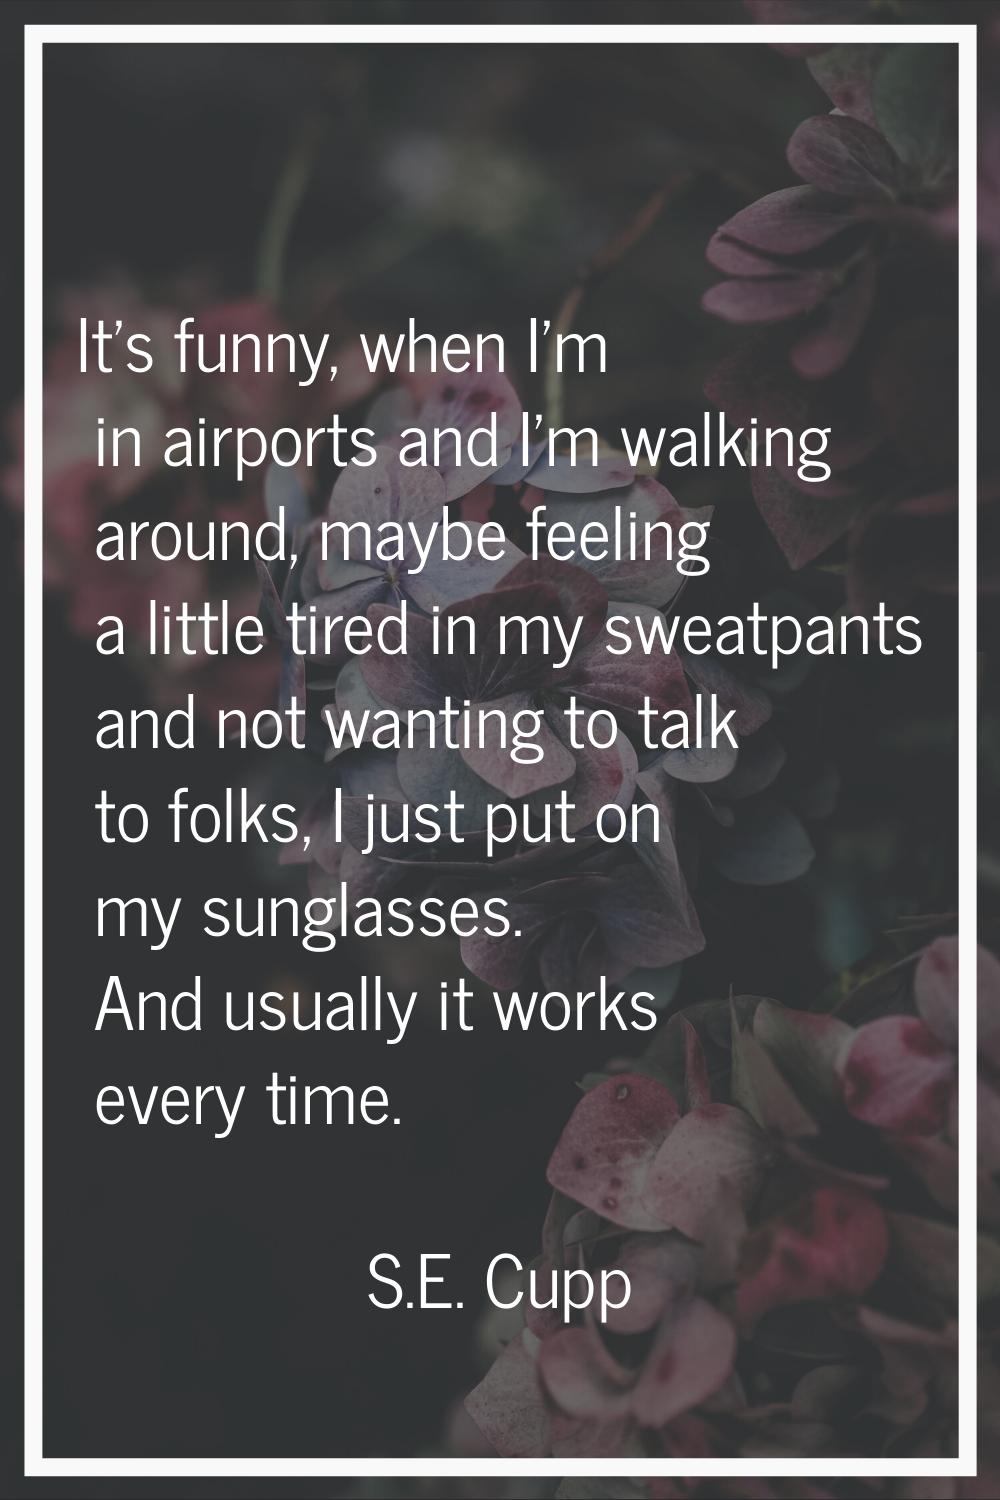 It’s funny, when I’m in airports and I’m walking around, maybe feeling a little tired in my sweatpa